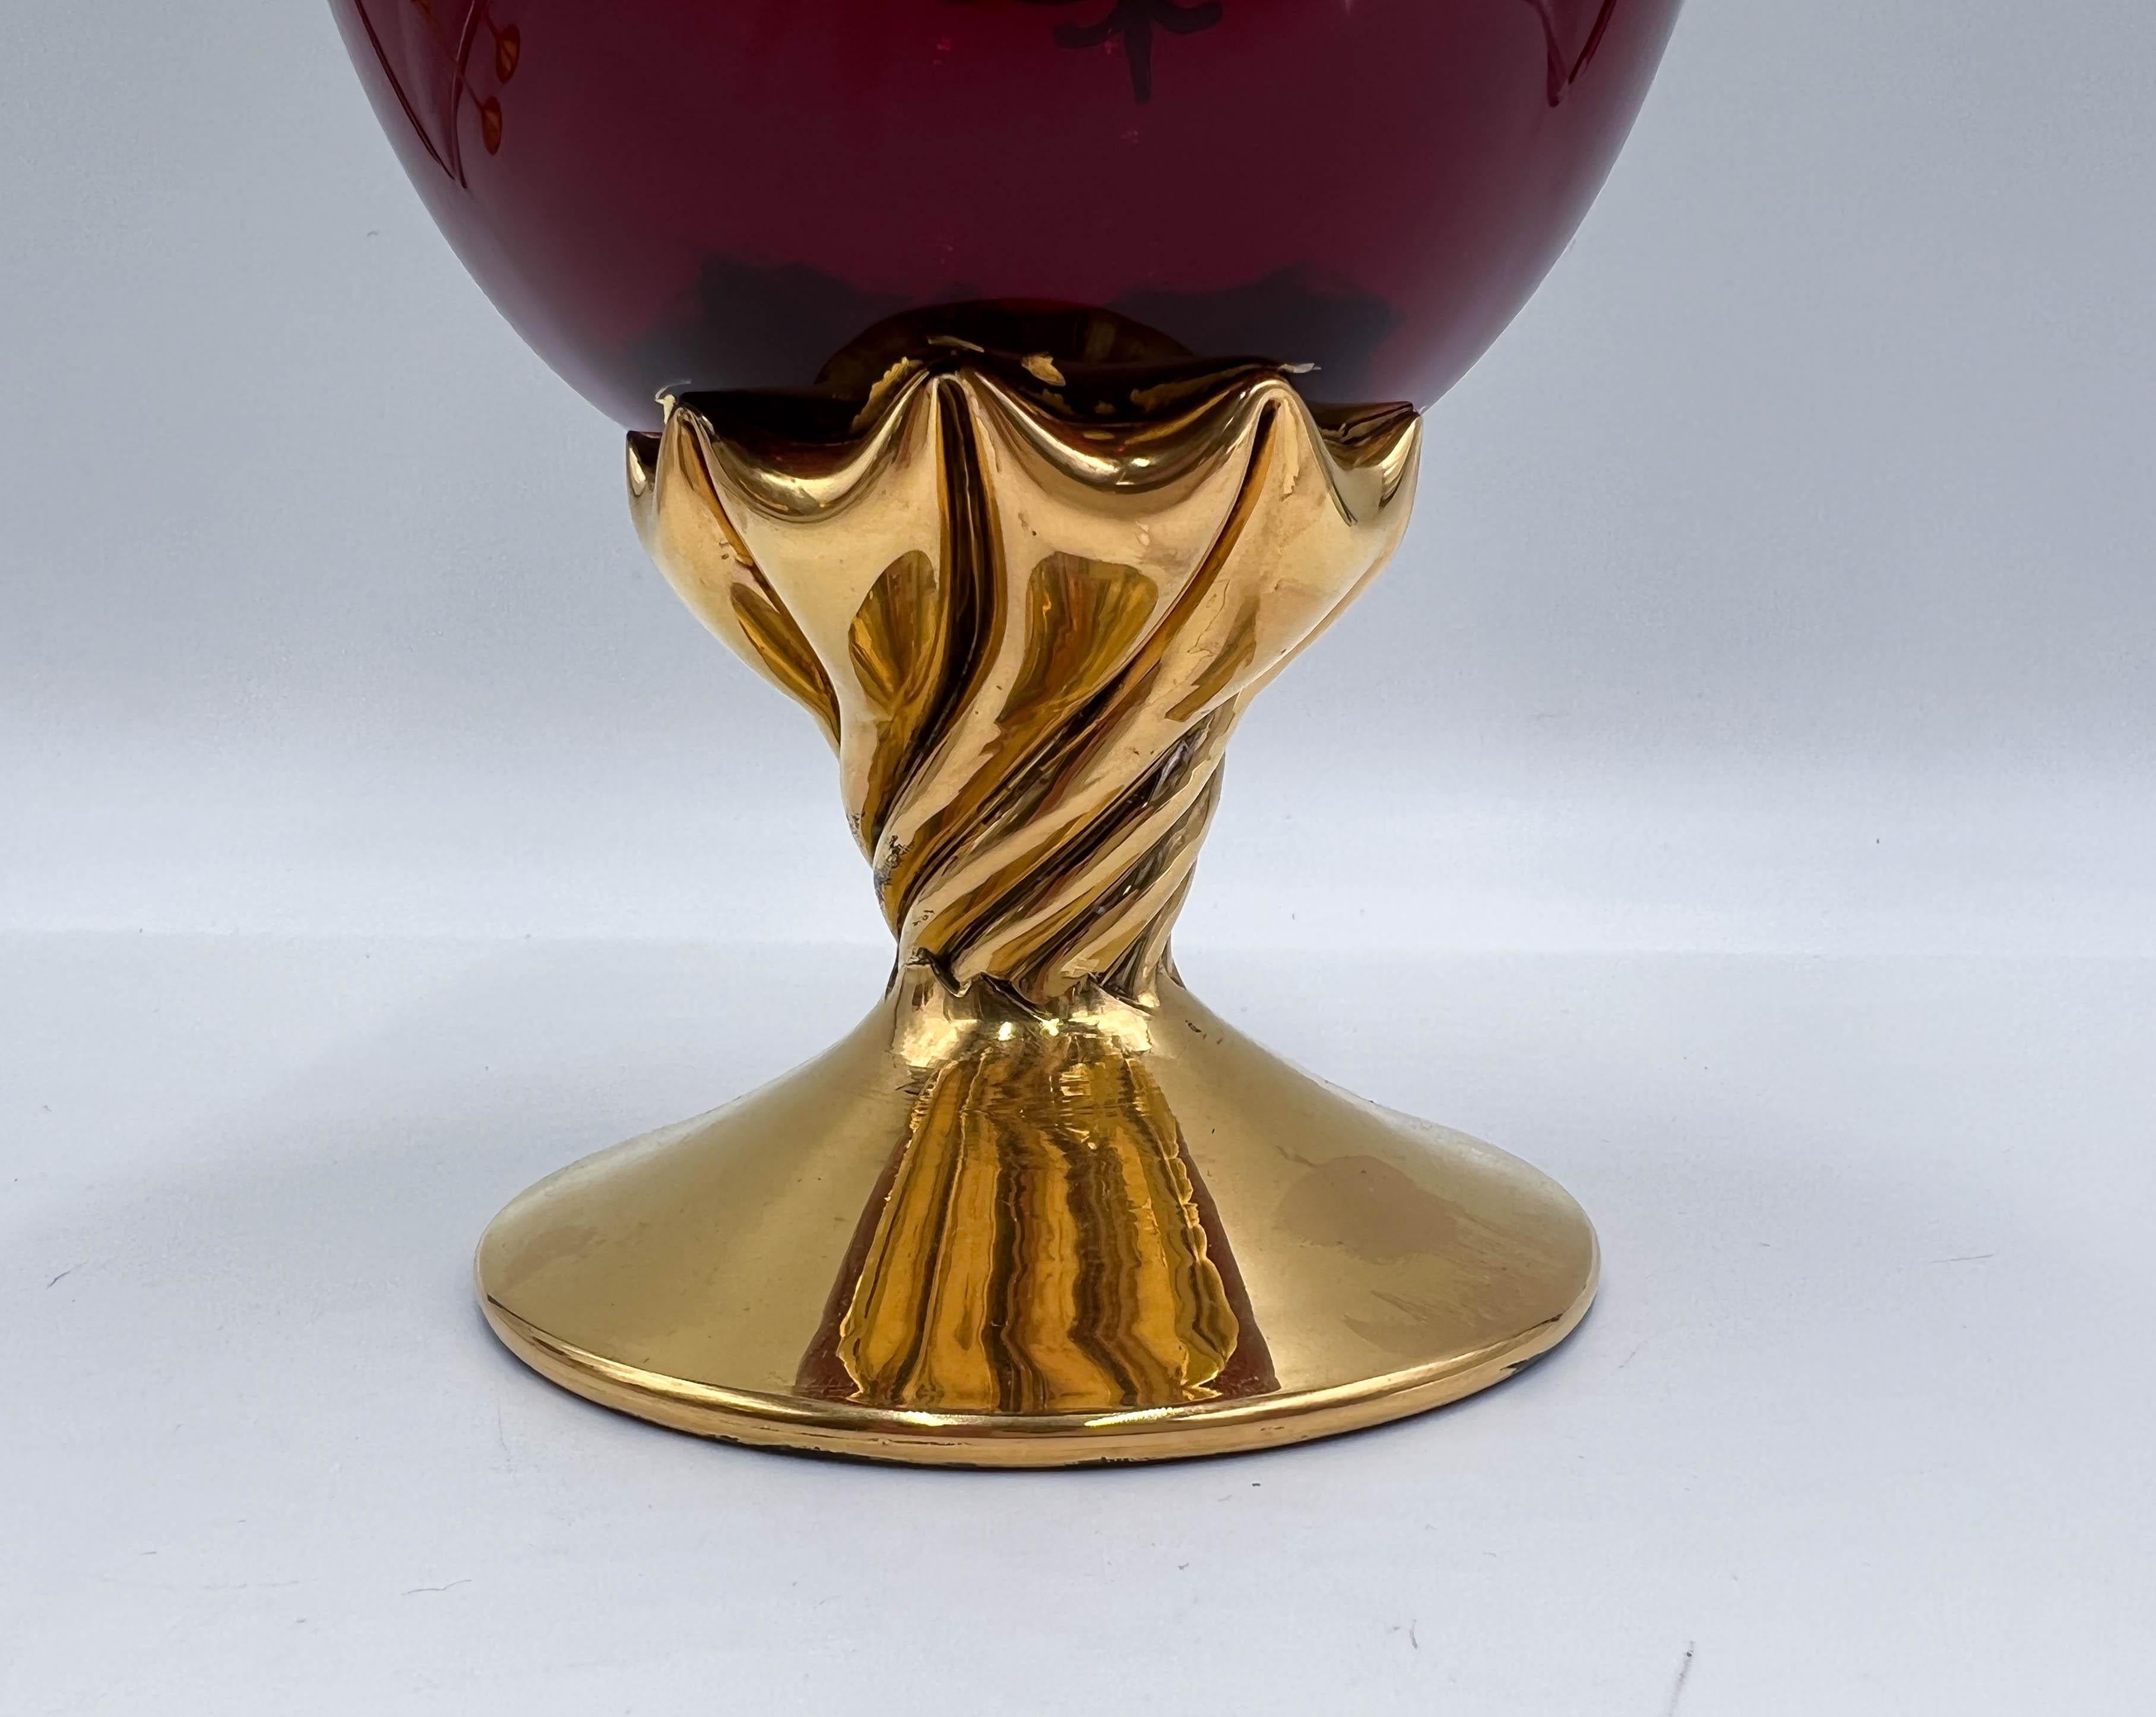 Vintage Tre Fuochi Venetian Murano Glass Ruby Red Goblets and Pitcher, 8 Pc Set For Sale 7